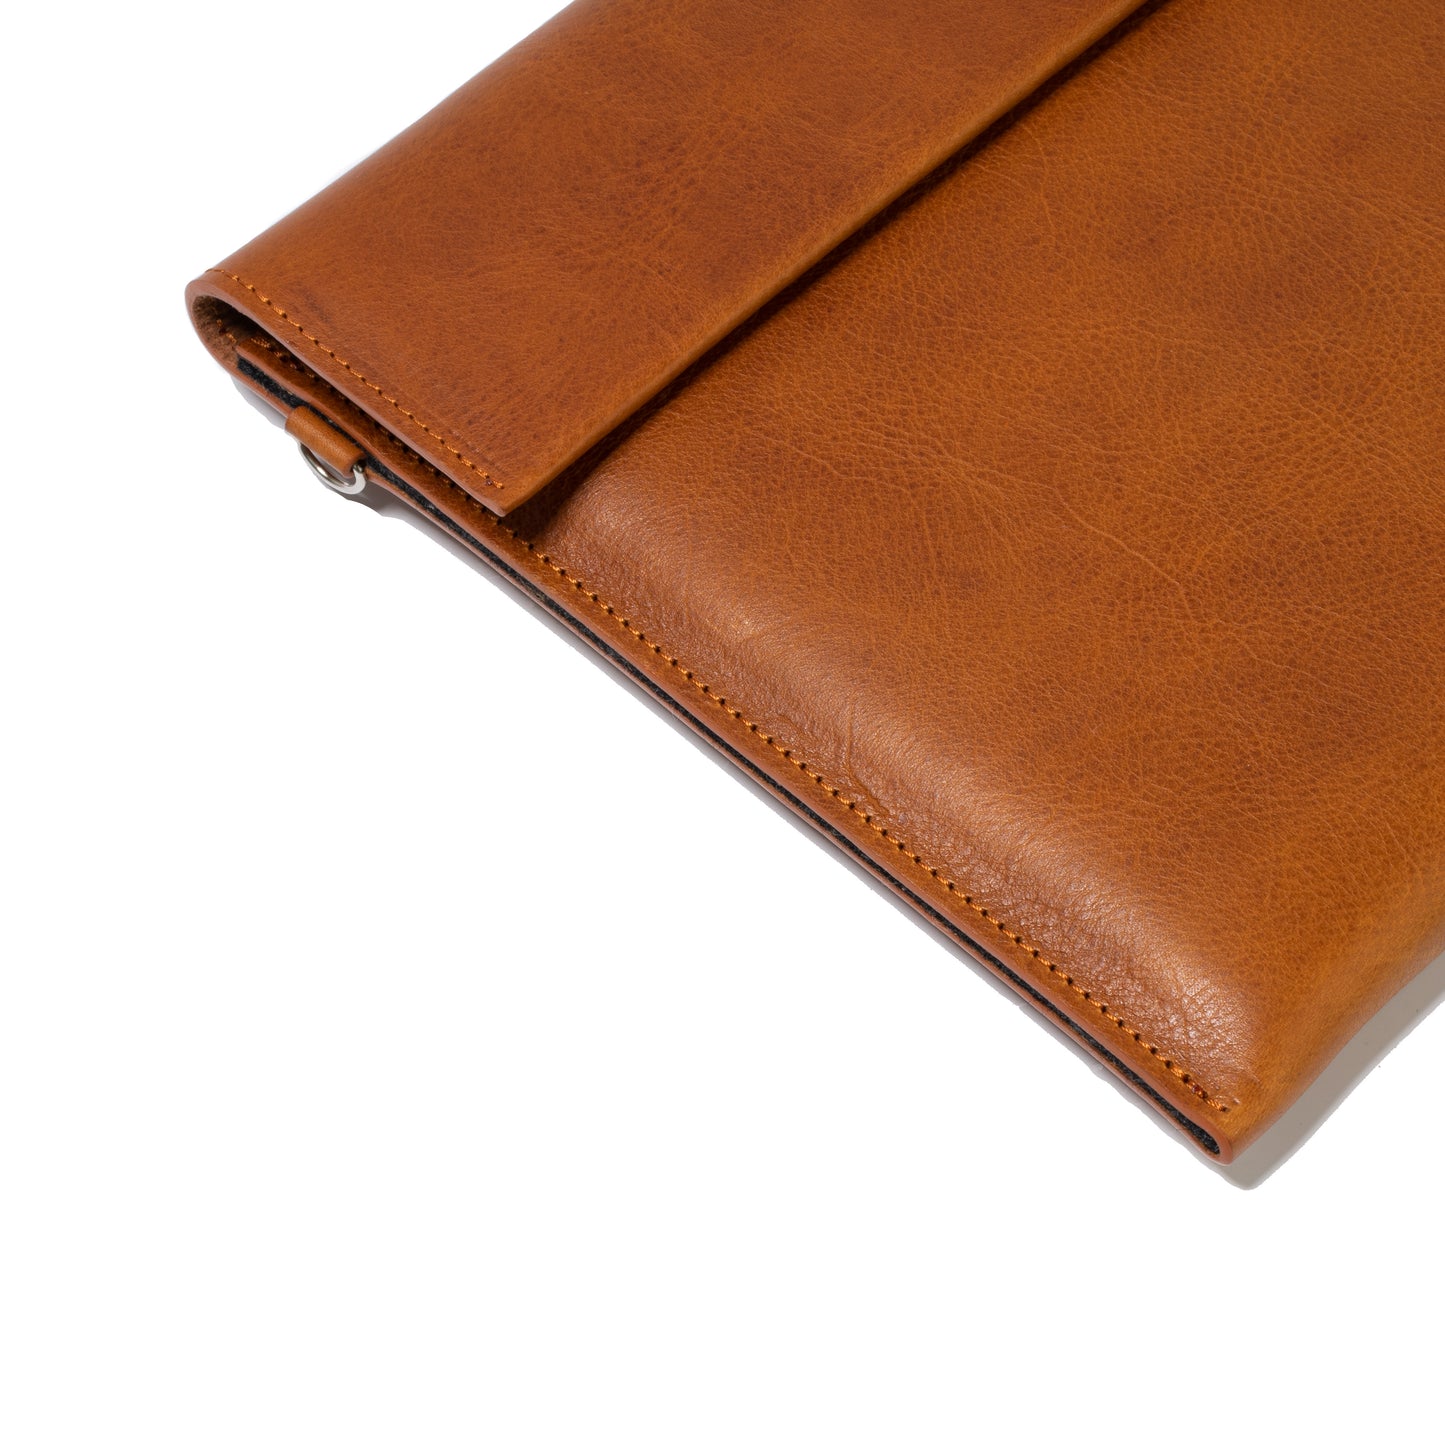 Leather Bag for MacBook - The Minimalist 2.0